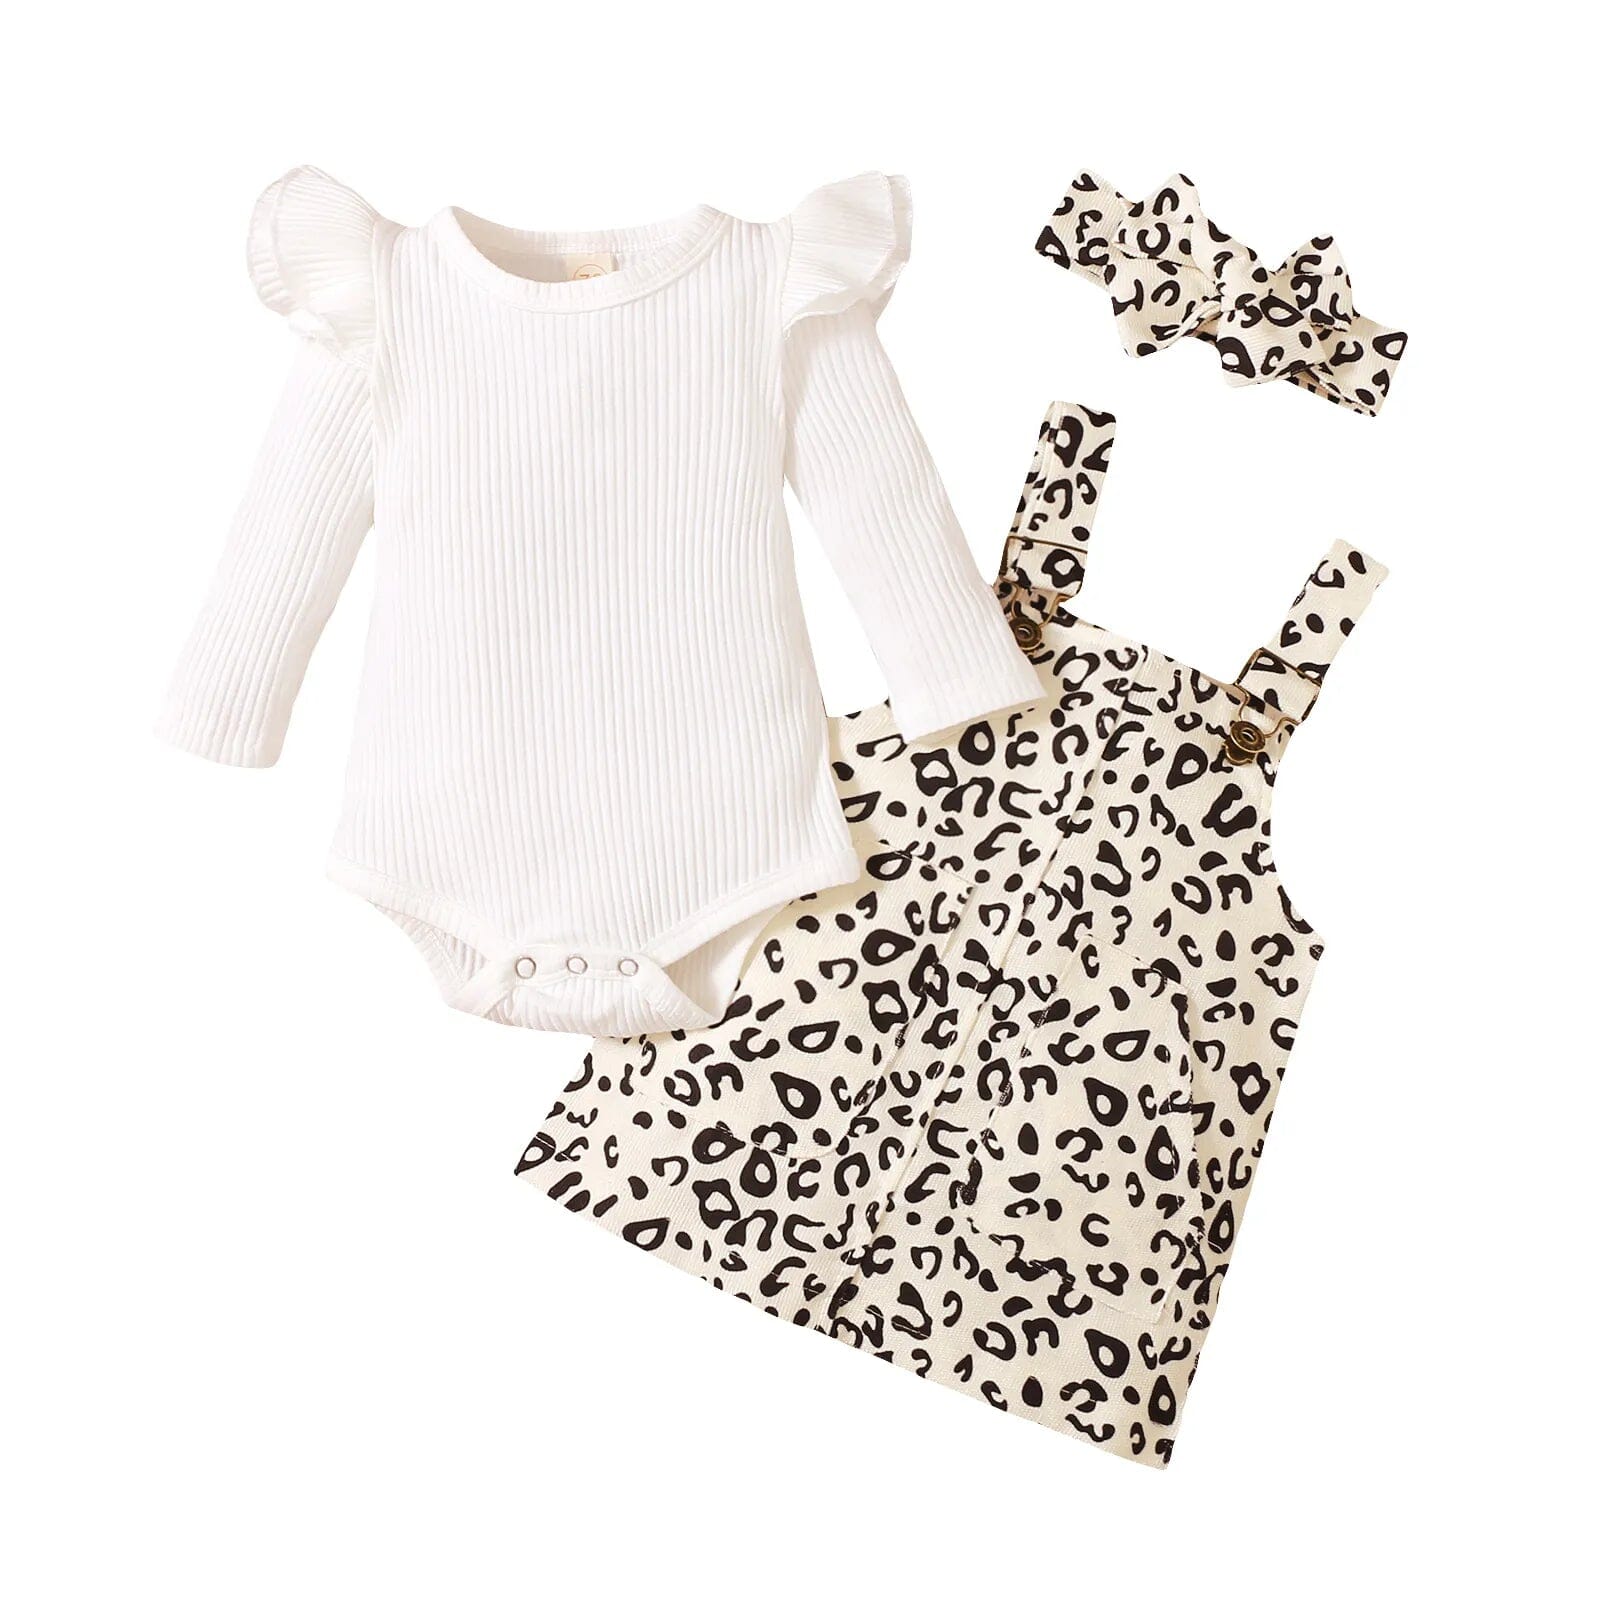 3 Pcs Baby Girls Casual Outfits, Ribbed Fly Sleeve Round Neck Bodysuit + Leopard Print Suspender Skirt + Bow Headband Baby Bubble Store White 3M 